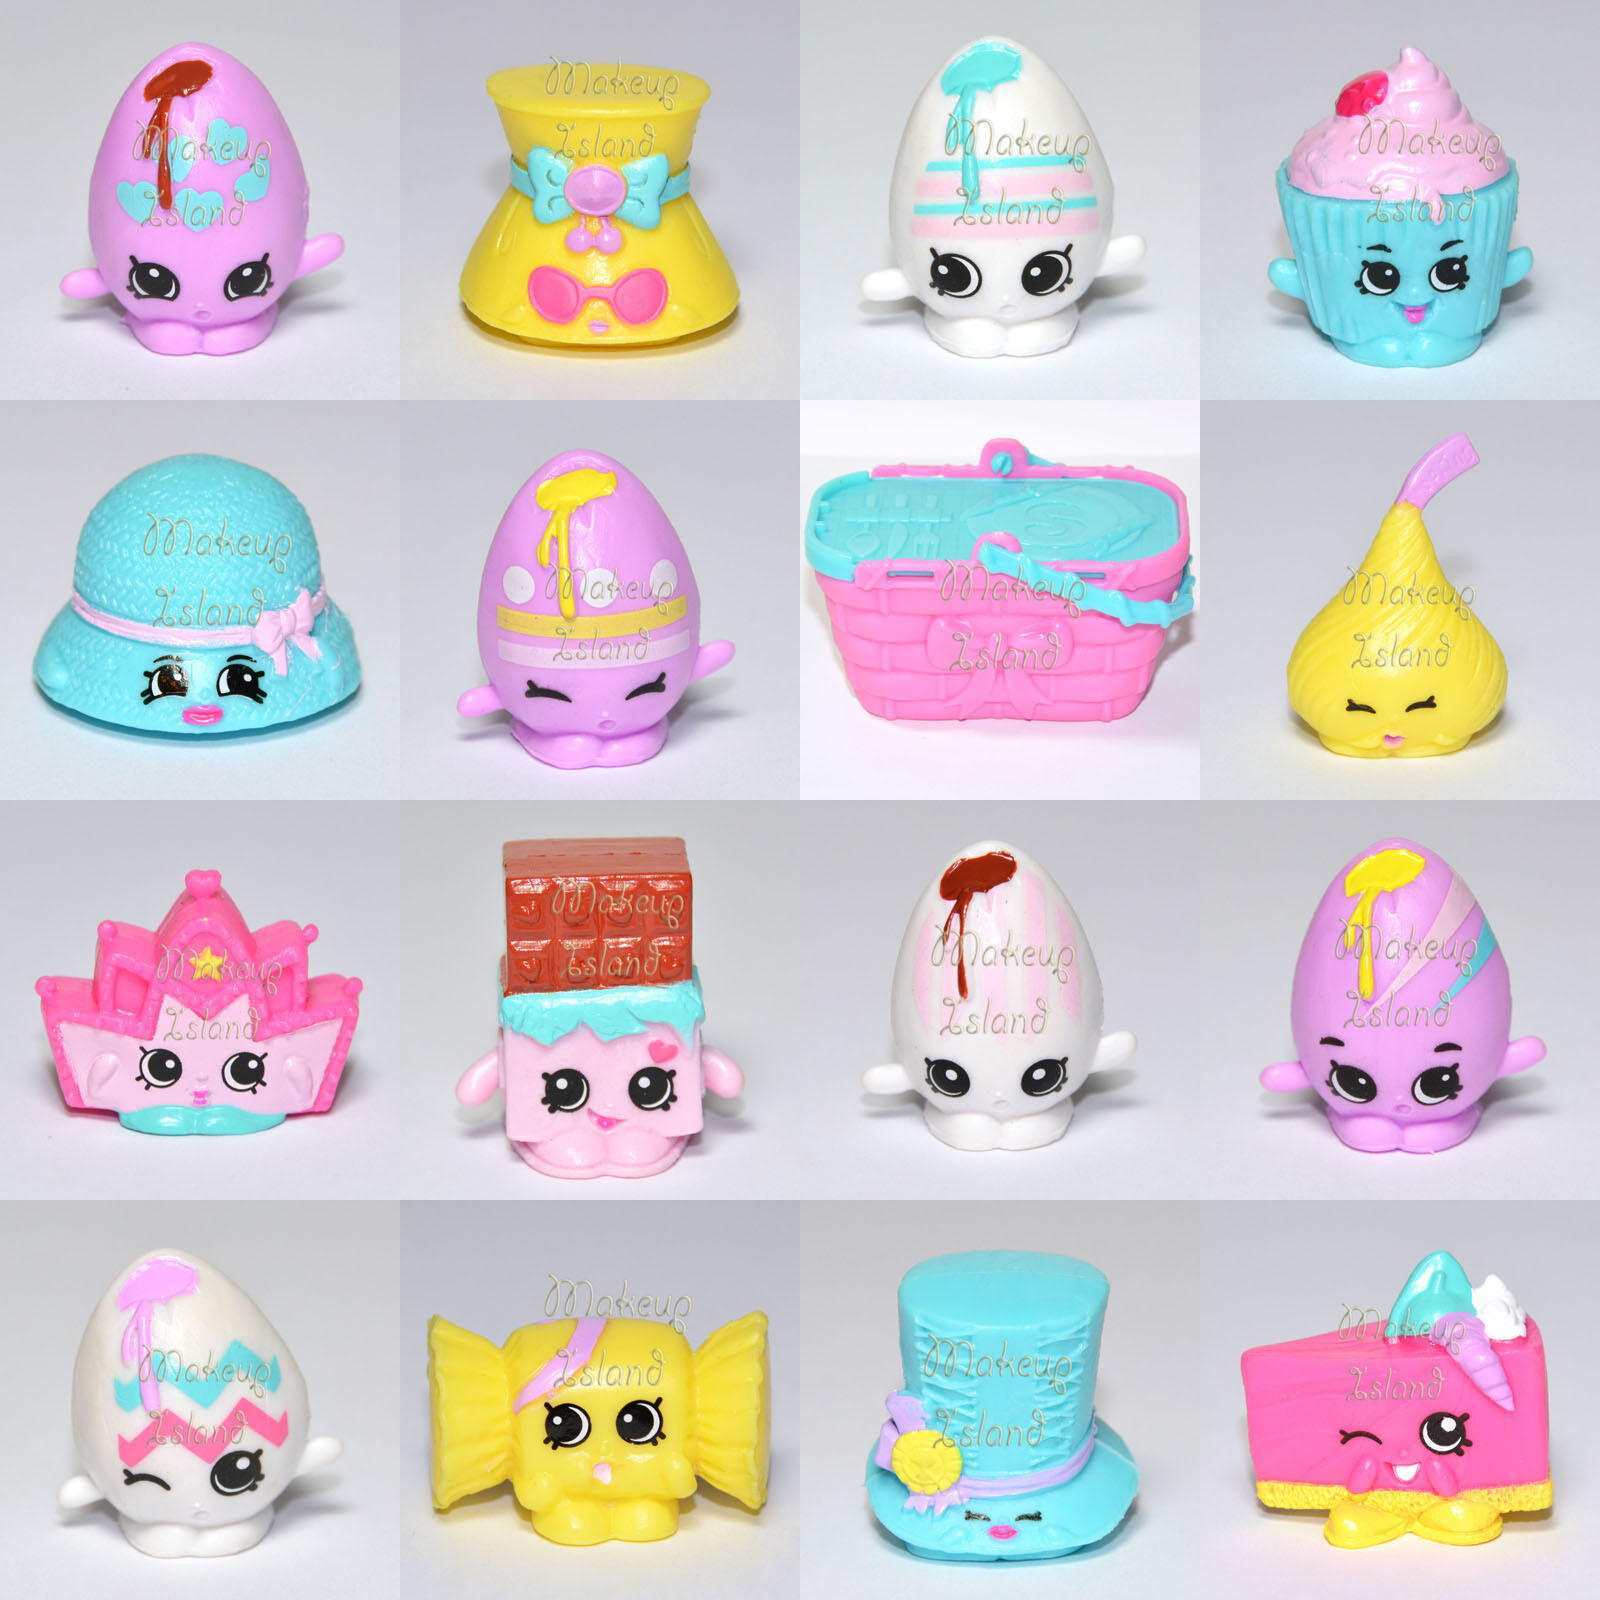 Loose Exclusive Easter 2017 Shopkins Pick From The List Free Us Shipping > $25